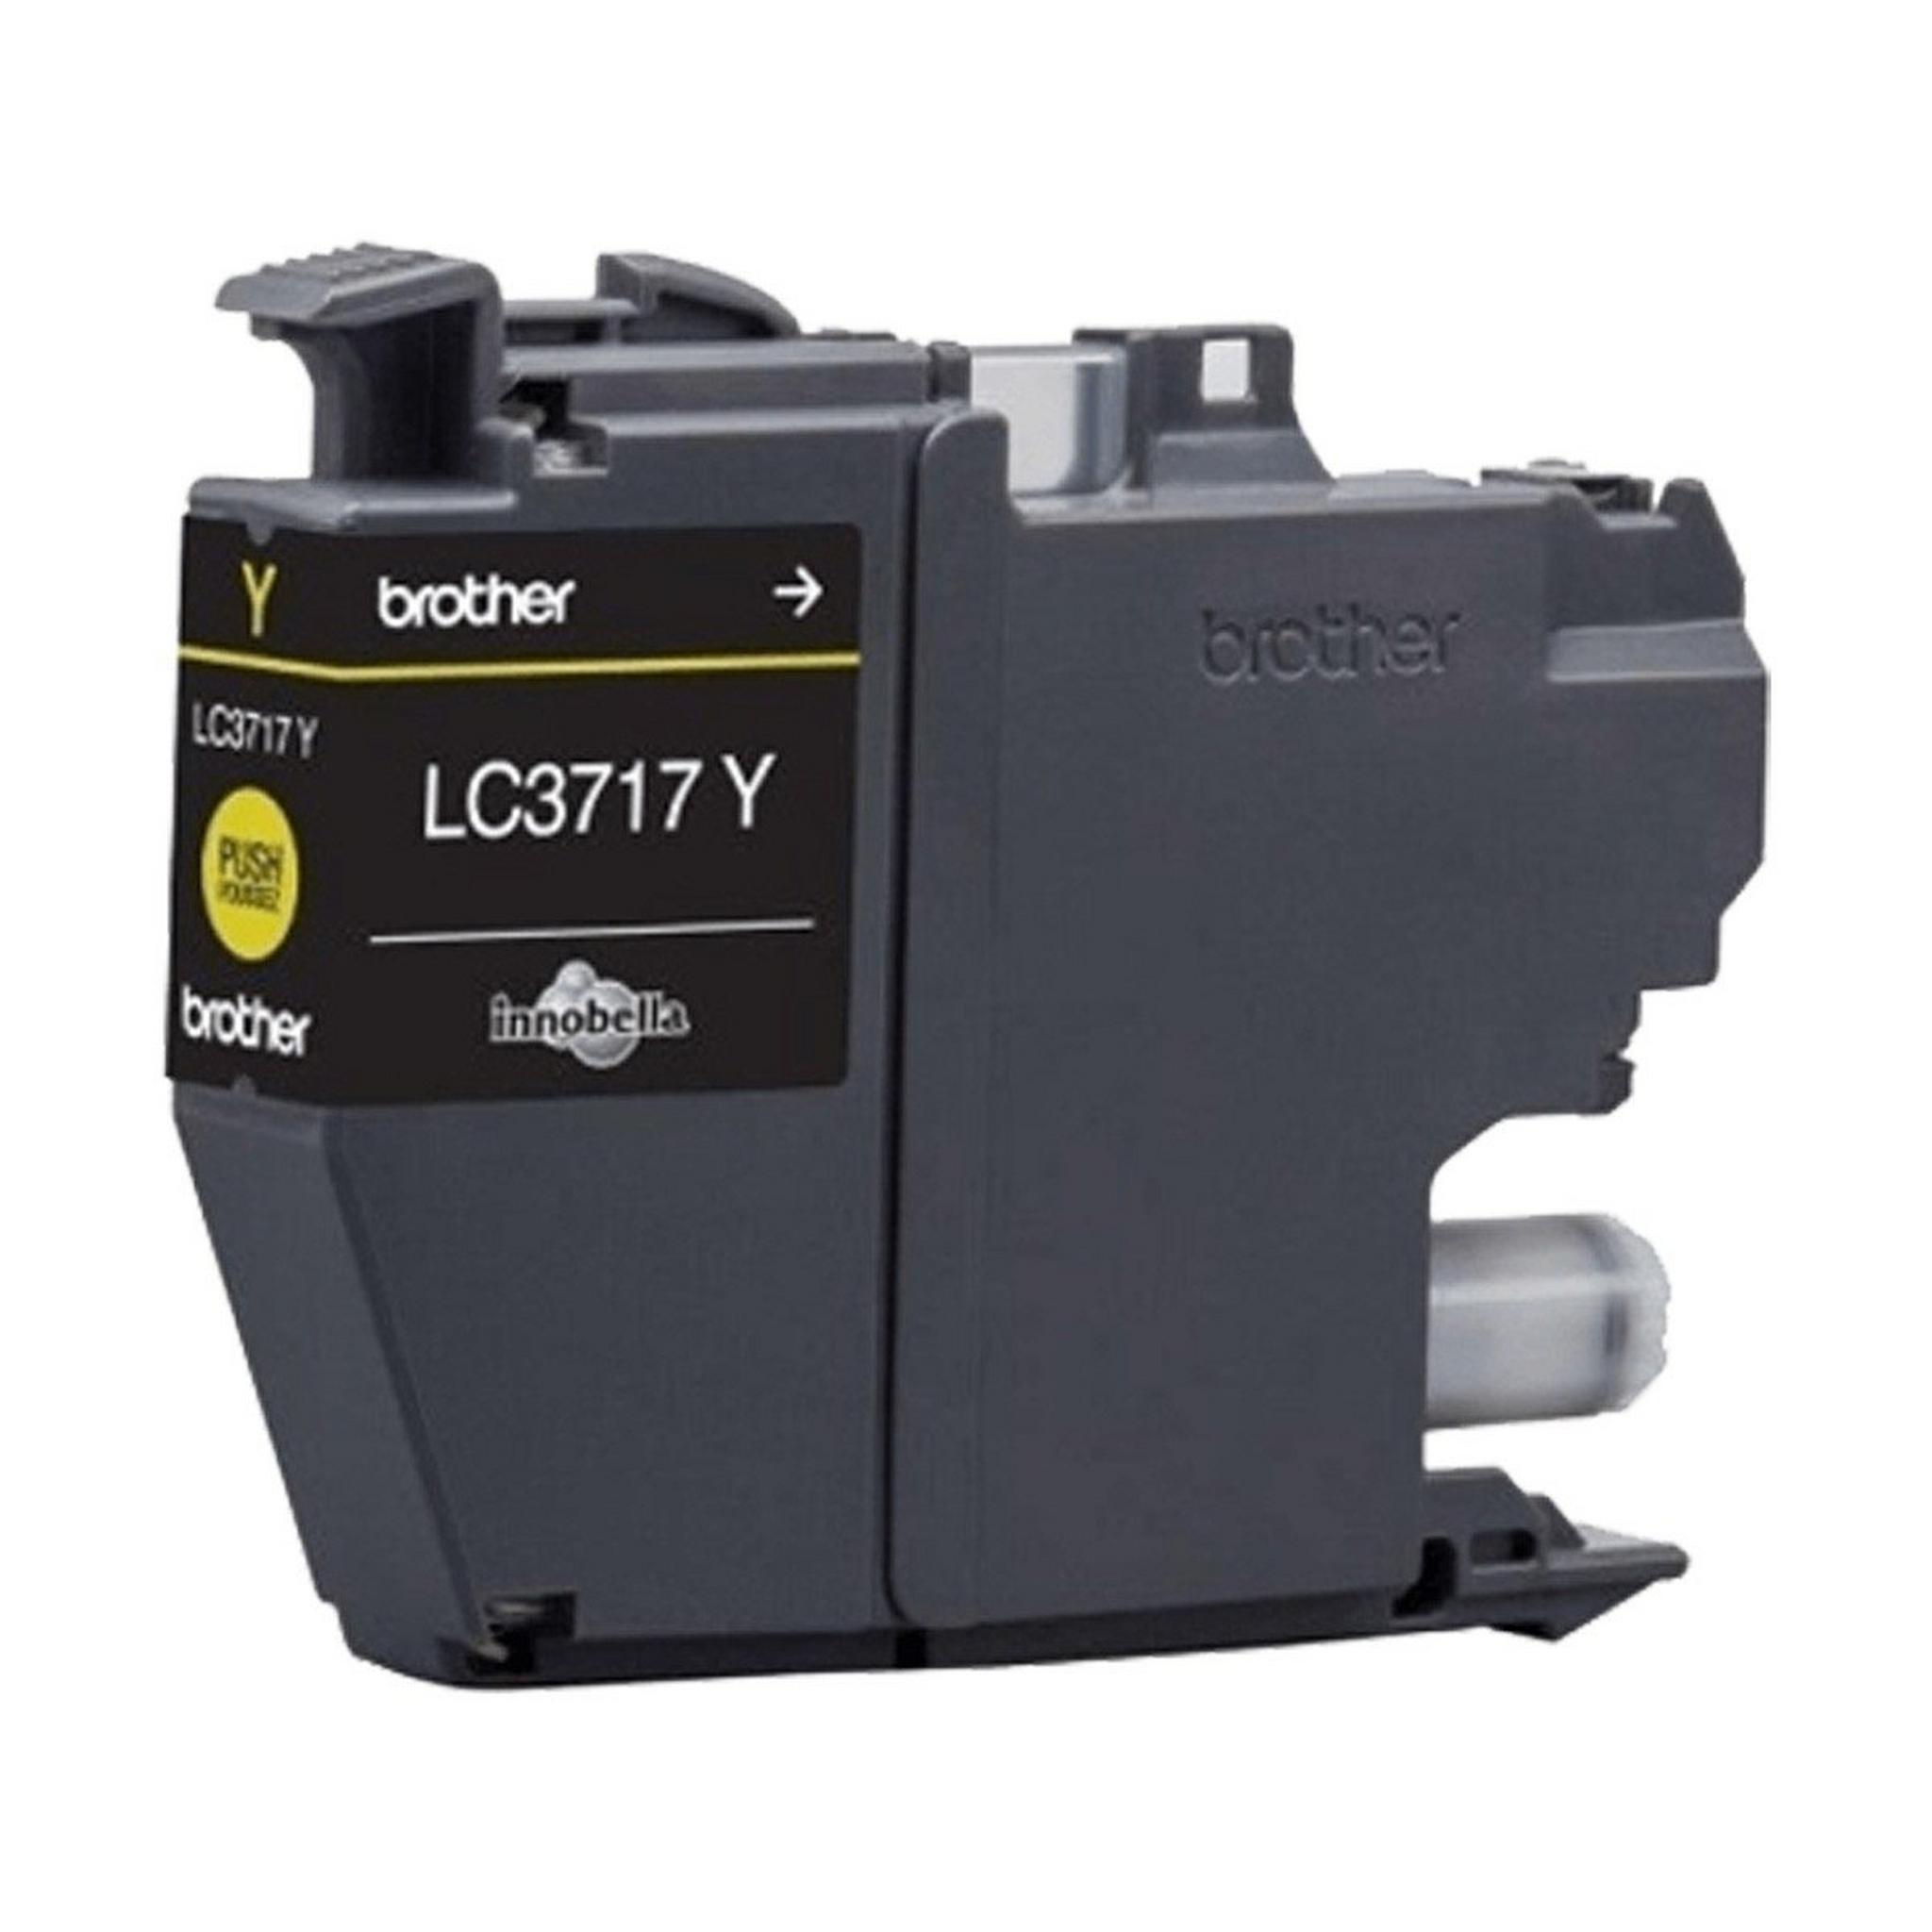 Brother Yellow Ink Cartridge -LC3717Y